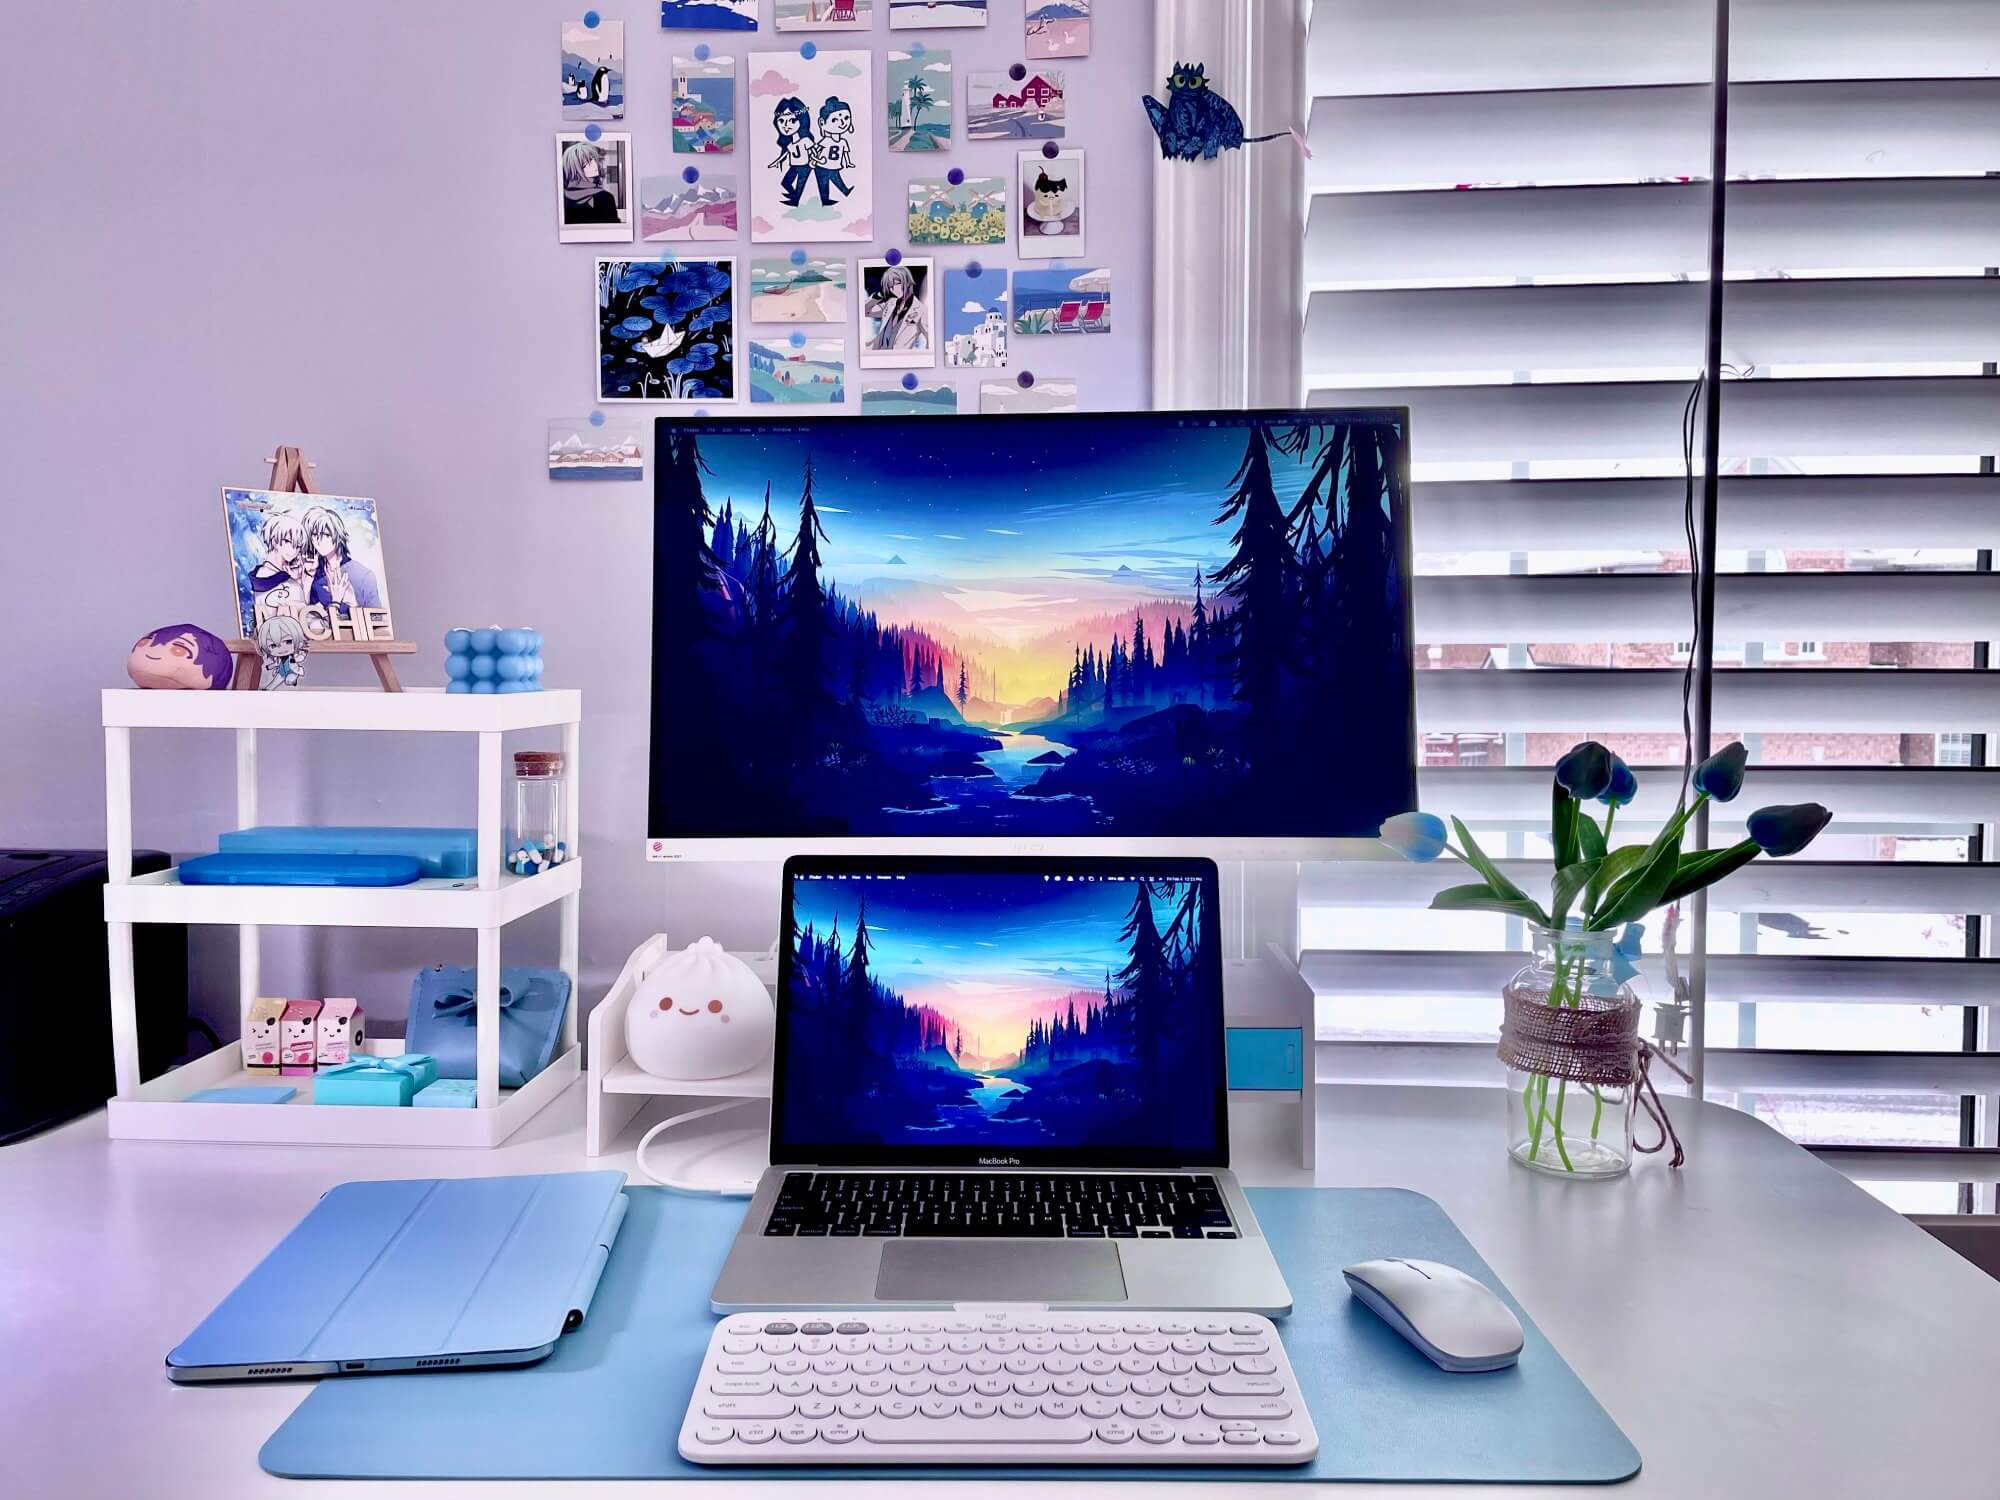 The blue workspace